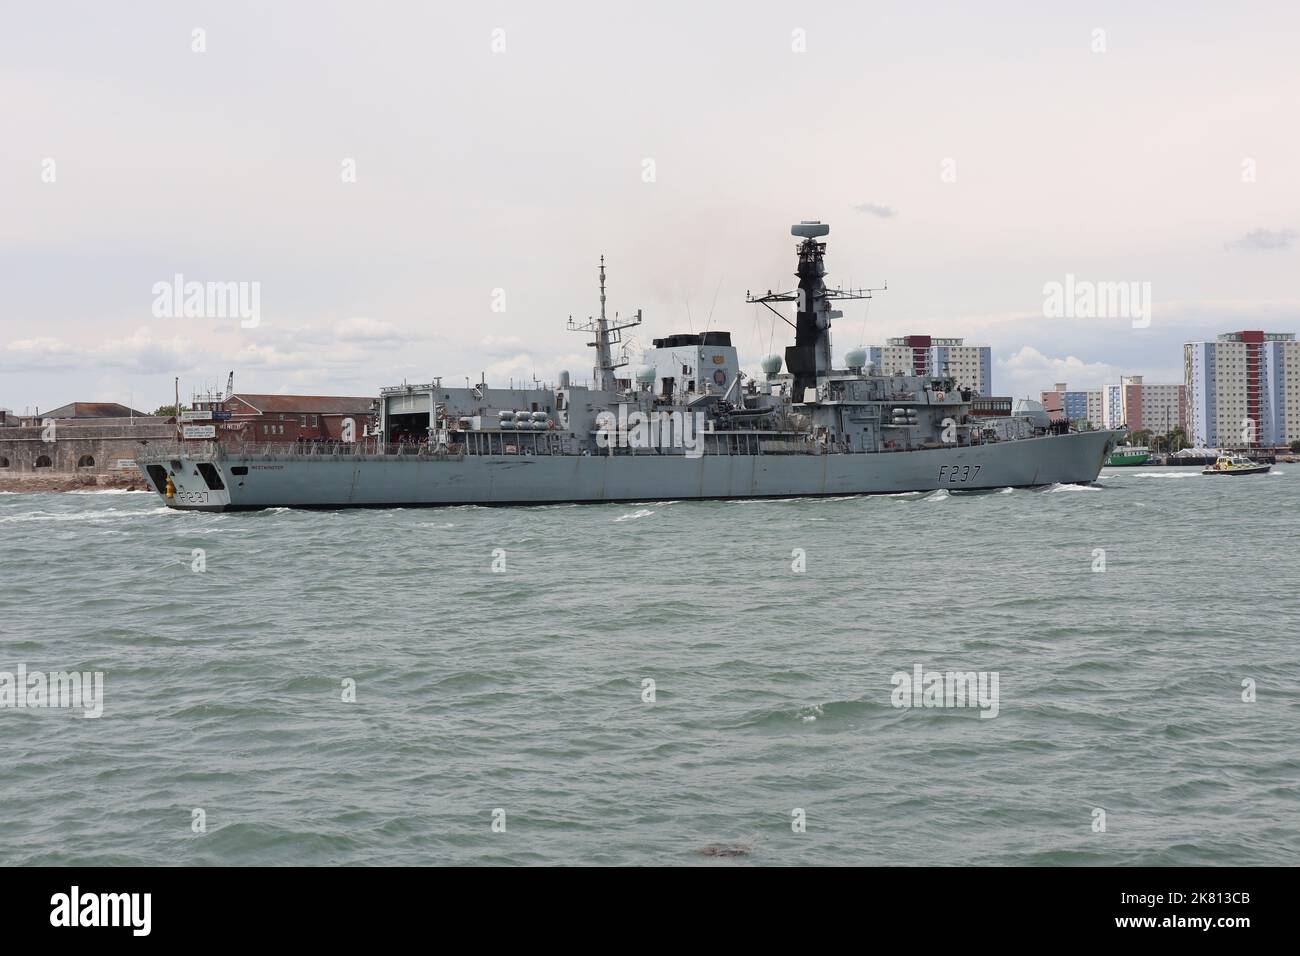 The Royal Navy frigate HMS WESTMINSTER returns to its home port Stock Photo